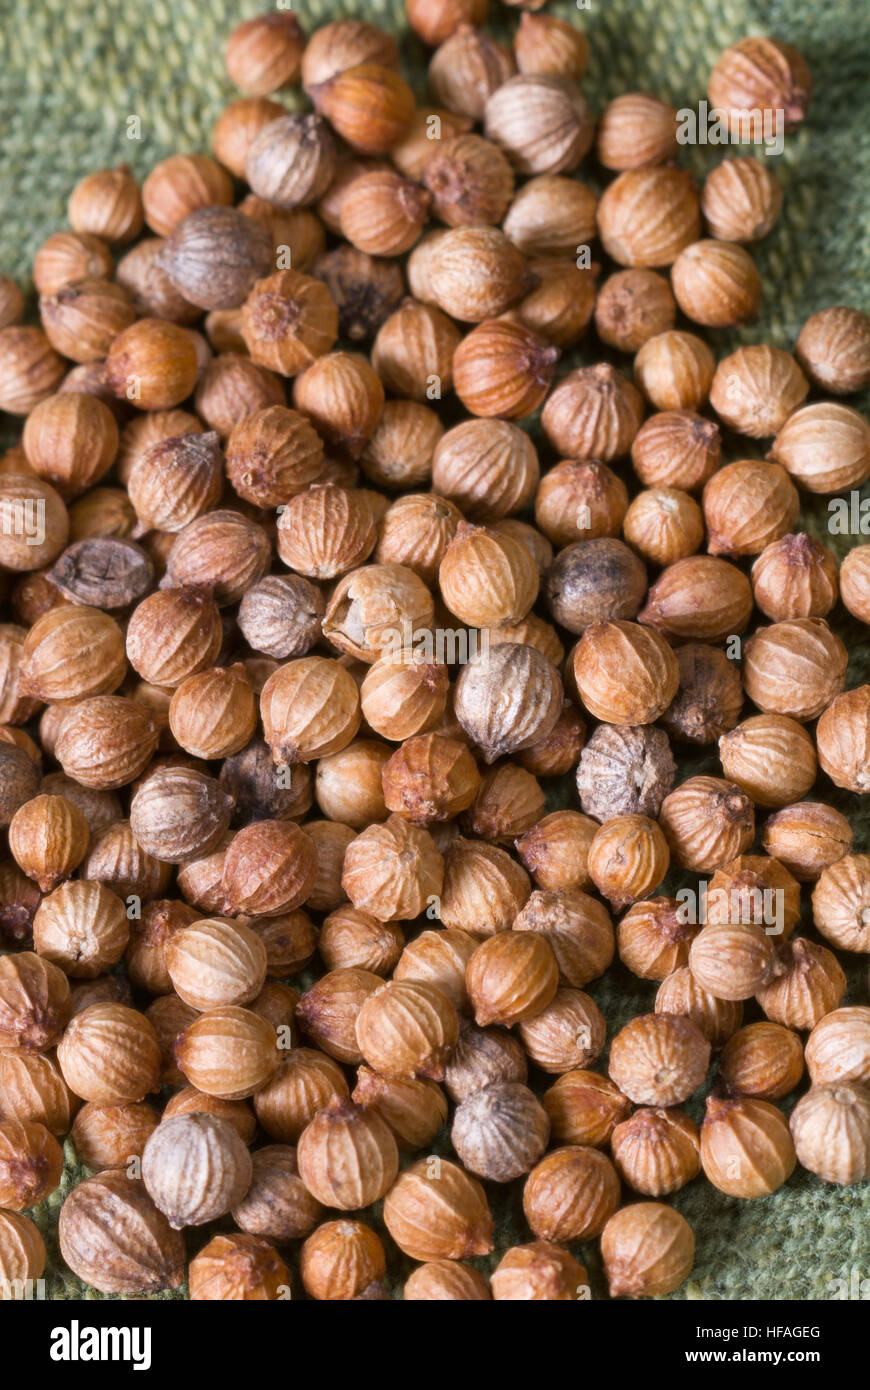 Coriander seeds Coriandrum sativum, aka cilantro or Chinese parsley, dried seeds in husks, picked ready to use Stock Photo